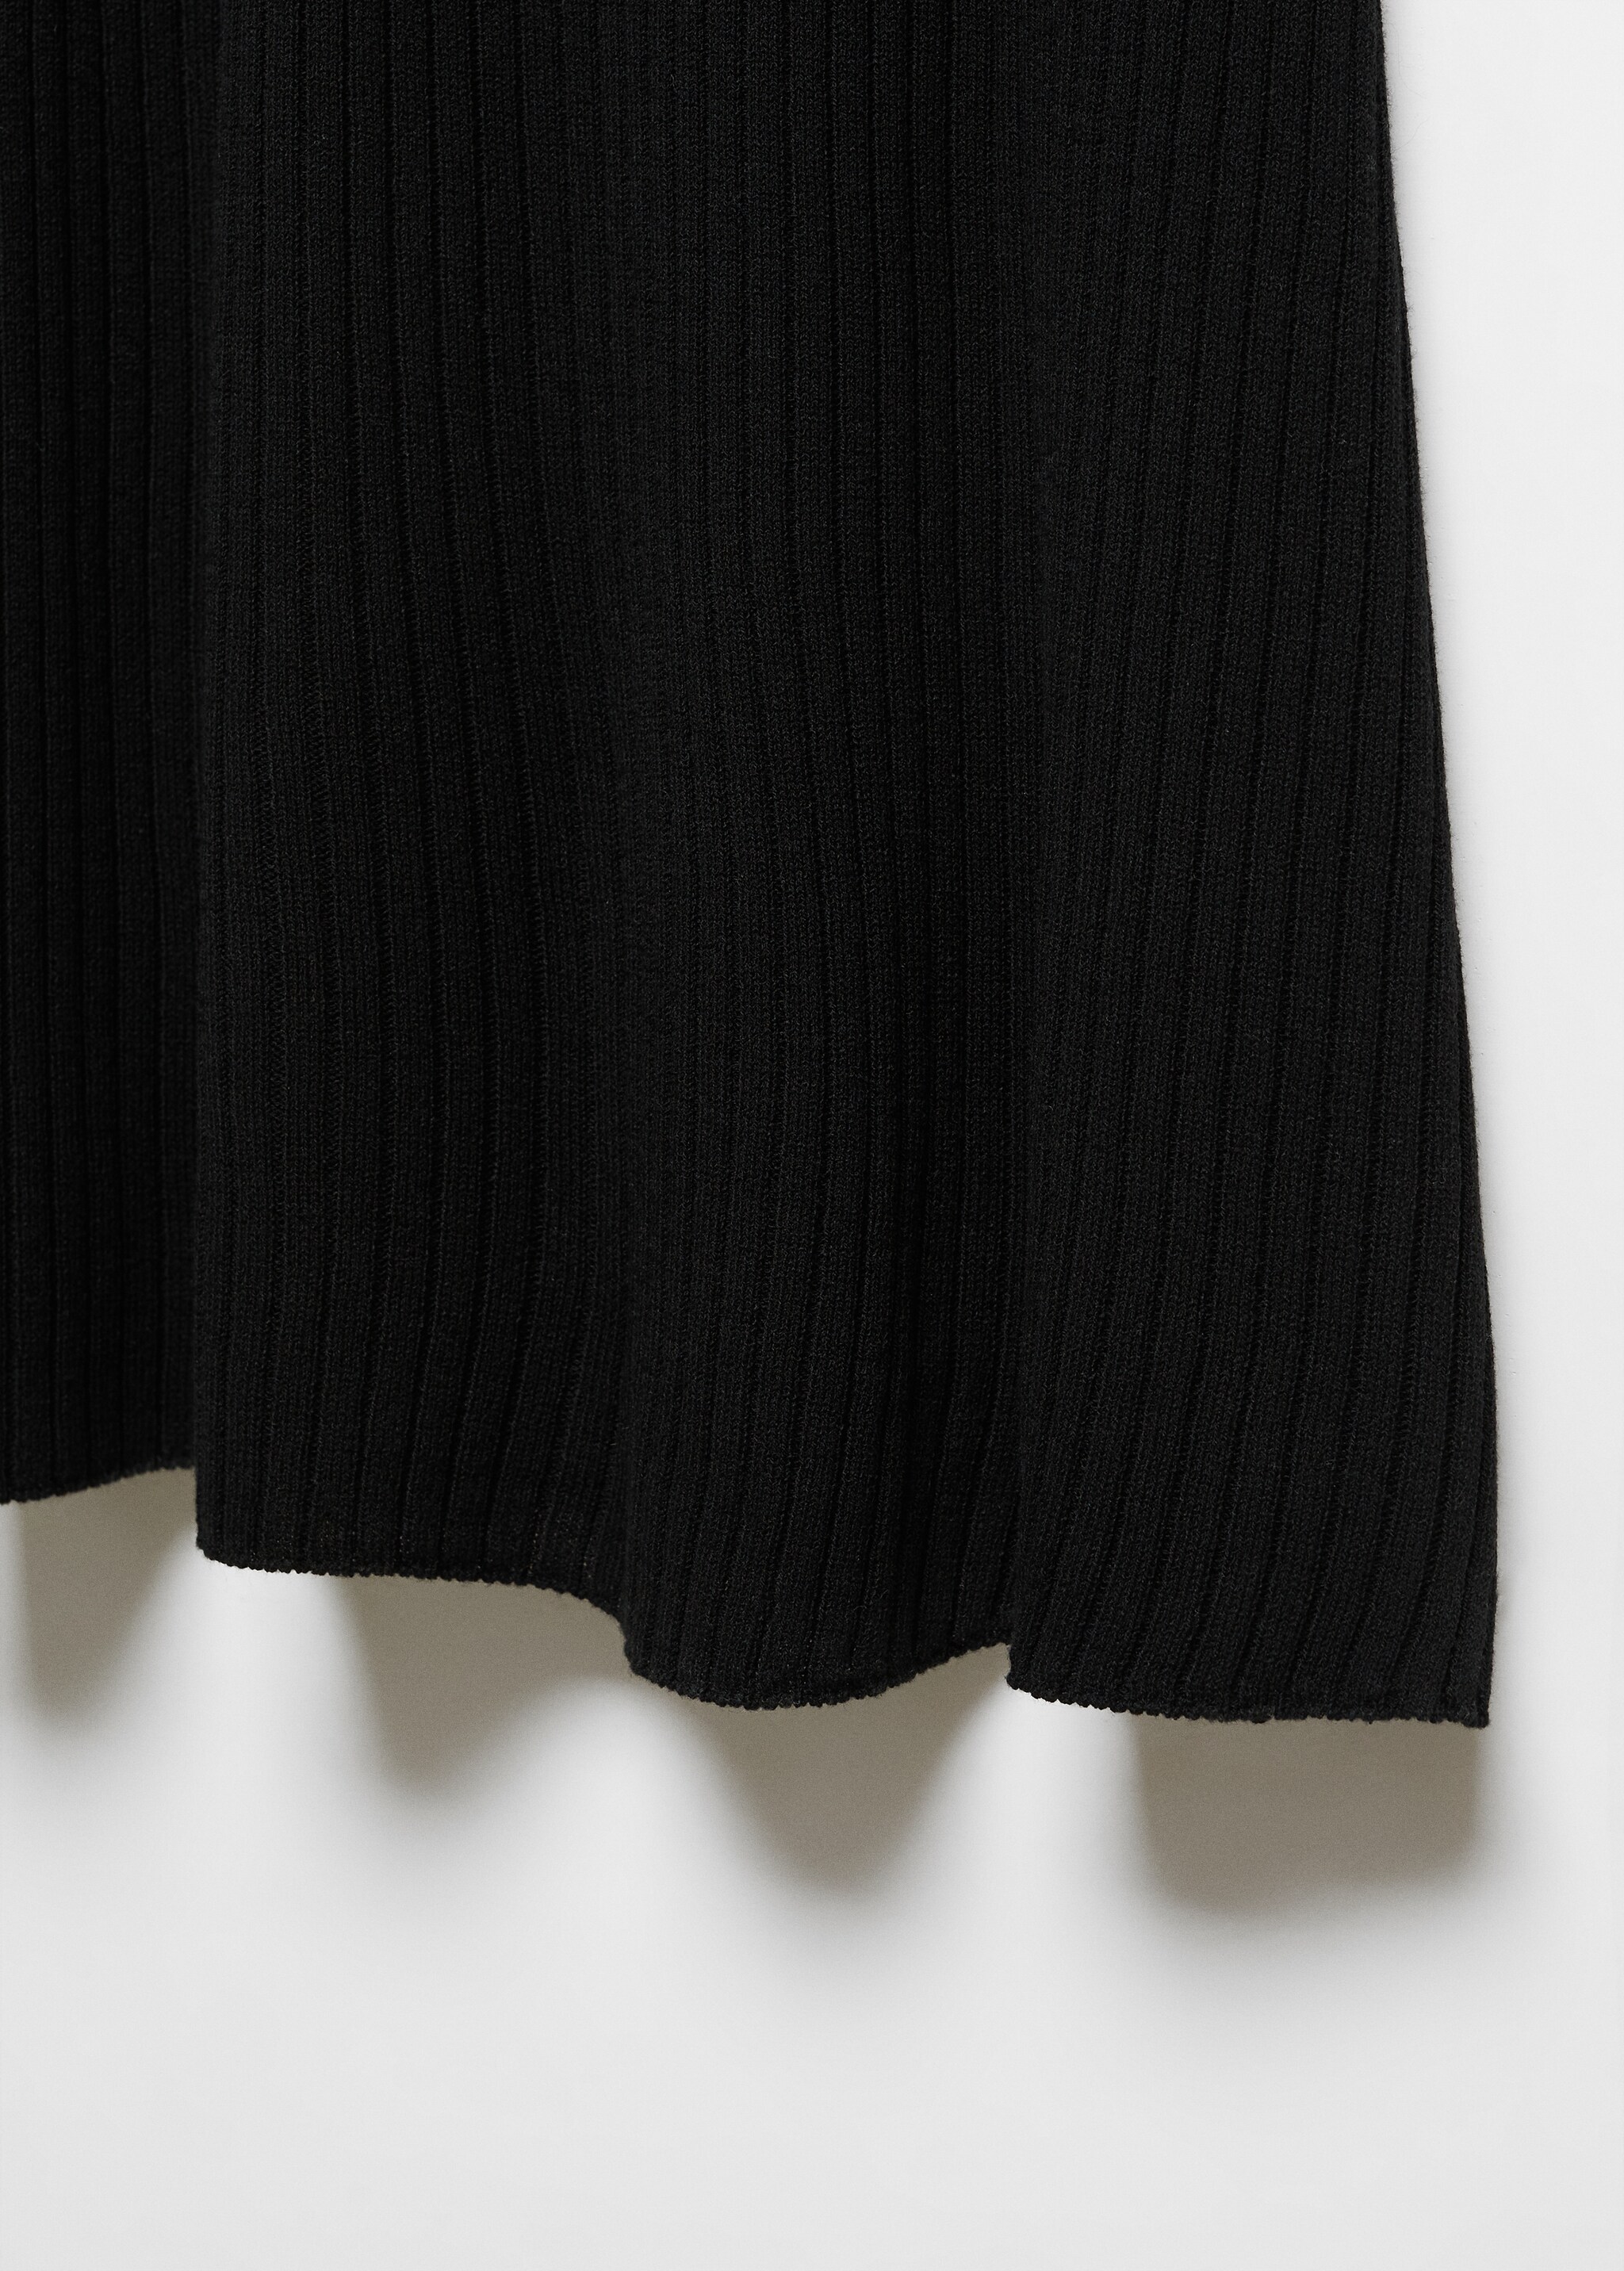 Rib-knit dress with slits - Details of the article 8